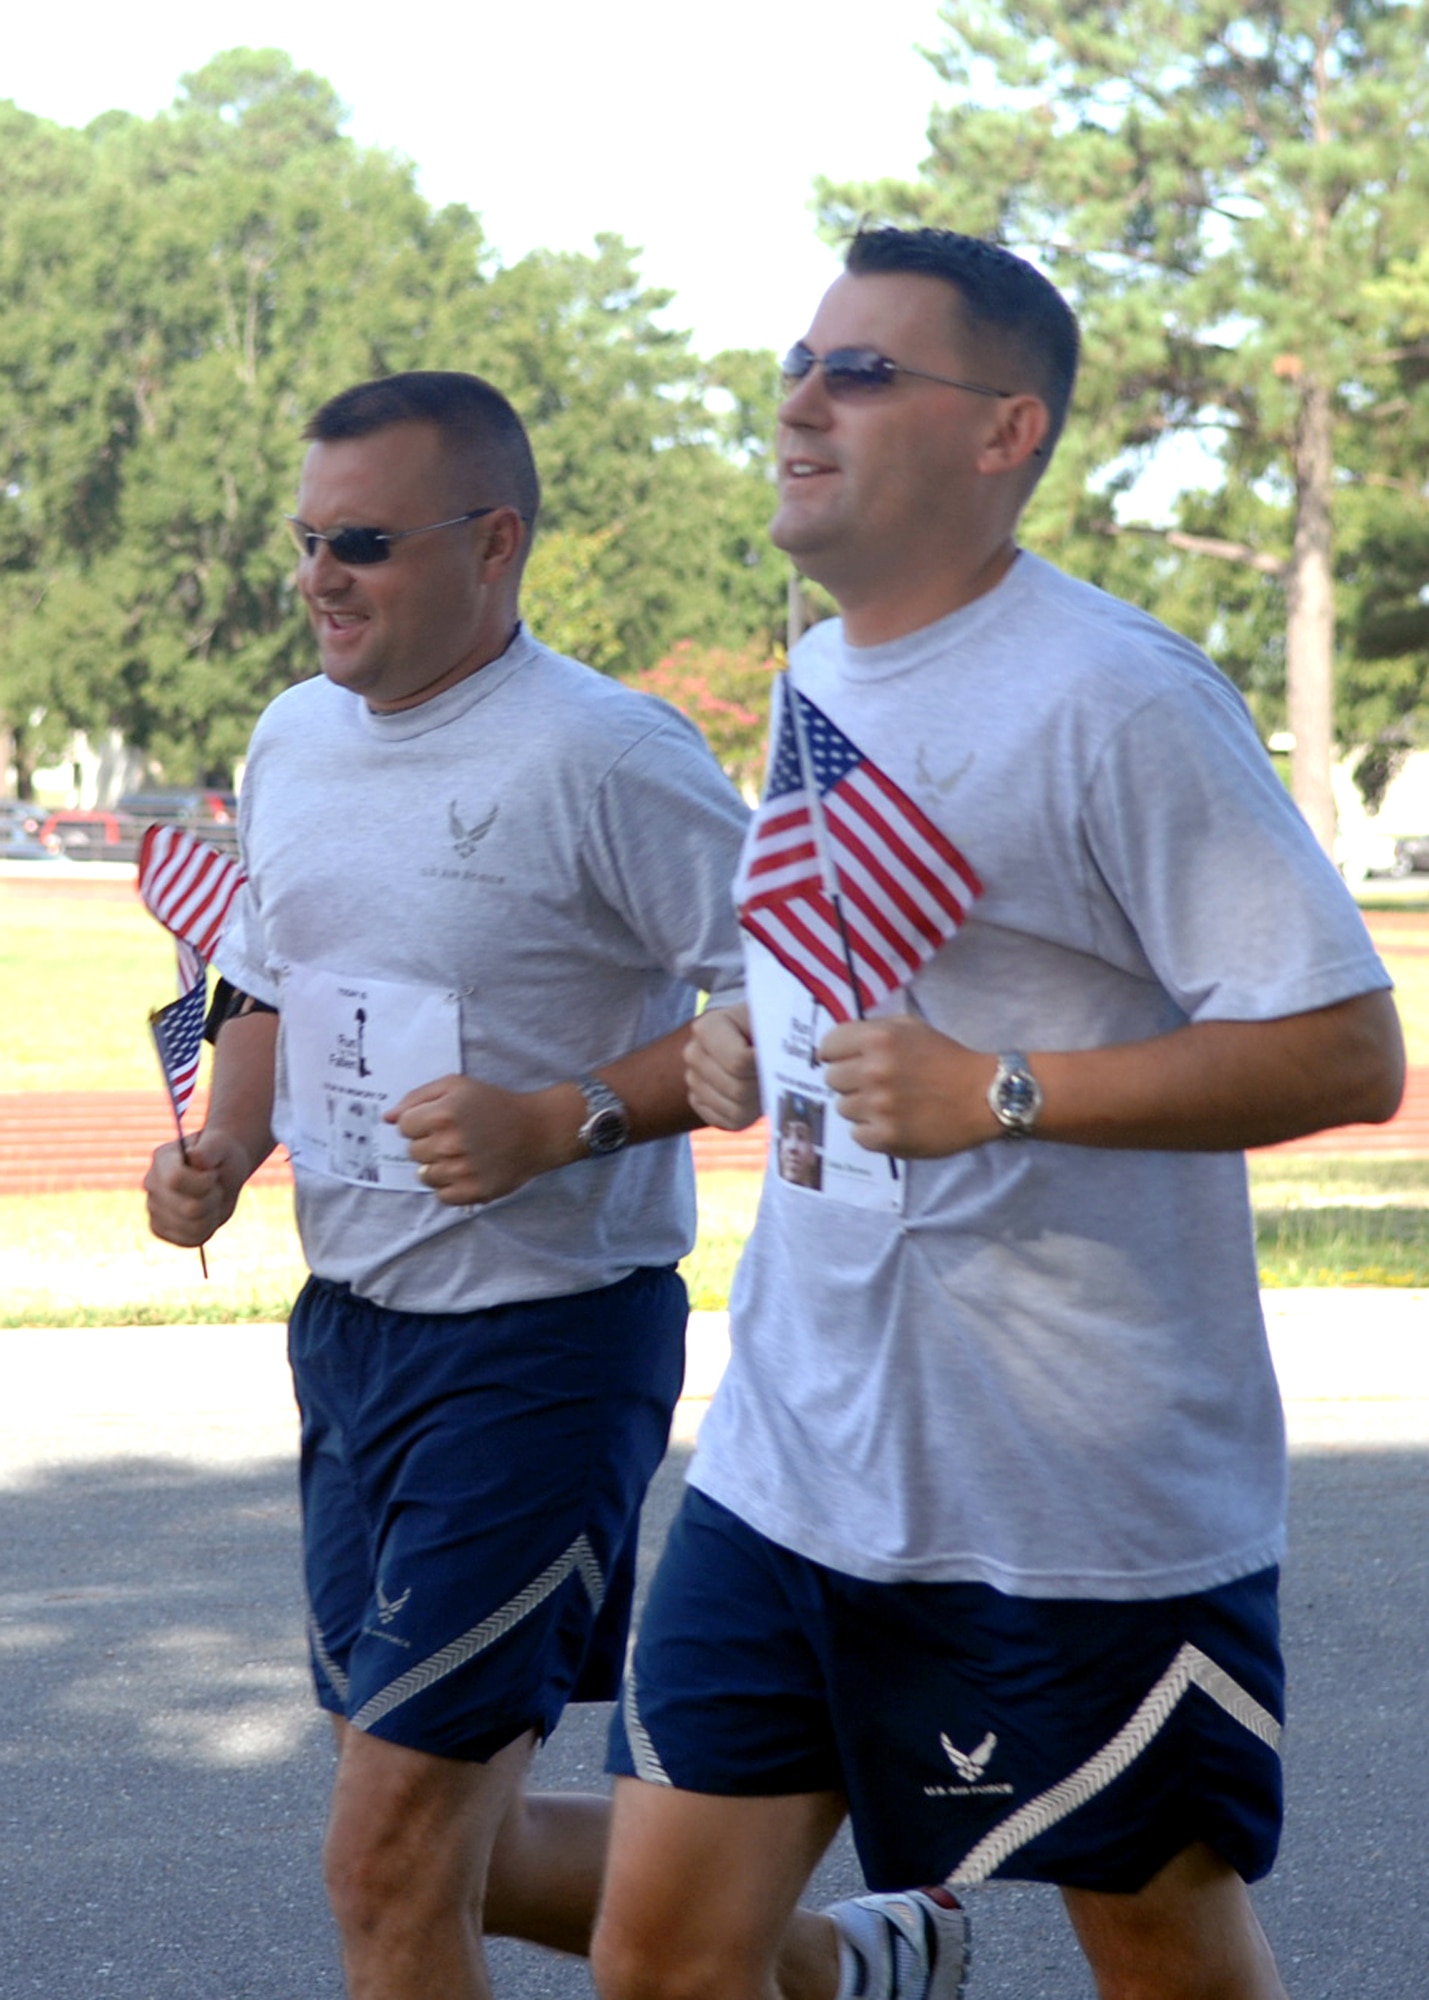 Technical Sergeant Marvin Glass and Master Sgt. Strother Brown run in Run for the Fallen on Seymour Johnson Air Force Base, NC, August 24. Run for the Fallen was a two-mile run to honor military members who lost their lives in Operation Iraqi Freedom and Operation Enduring Freedom. (U.S. Air Force photo by Airman 1st Class Makenzie Lang)